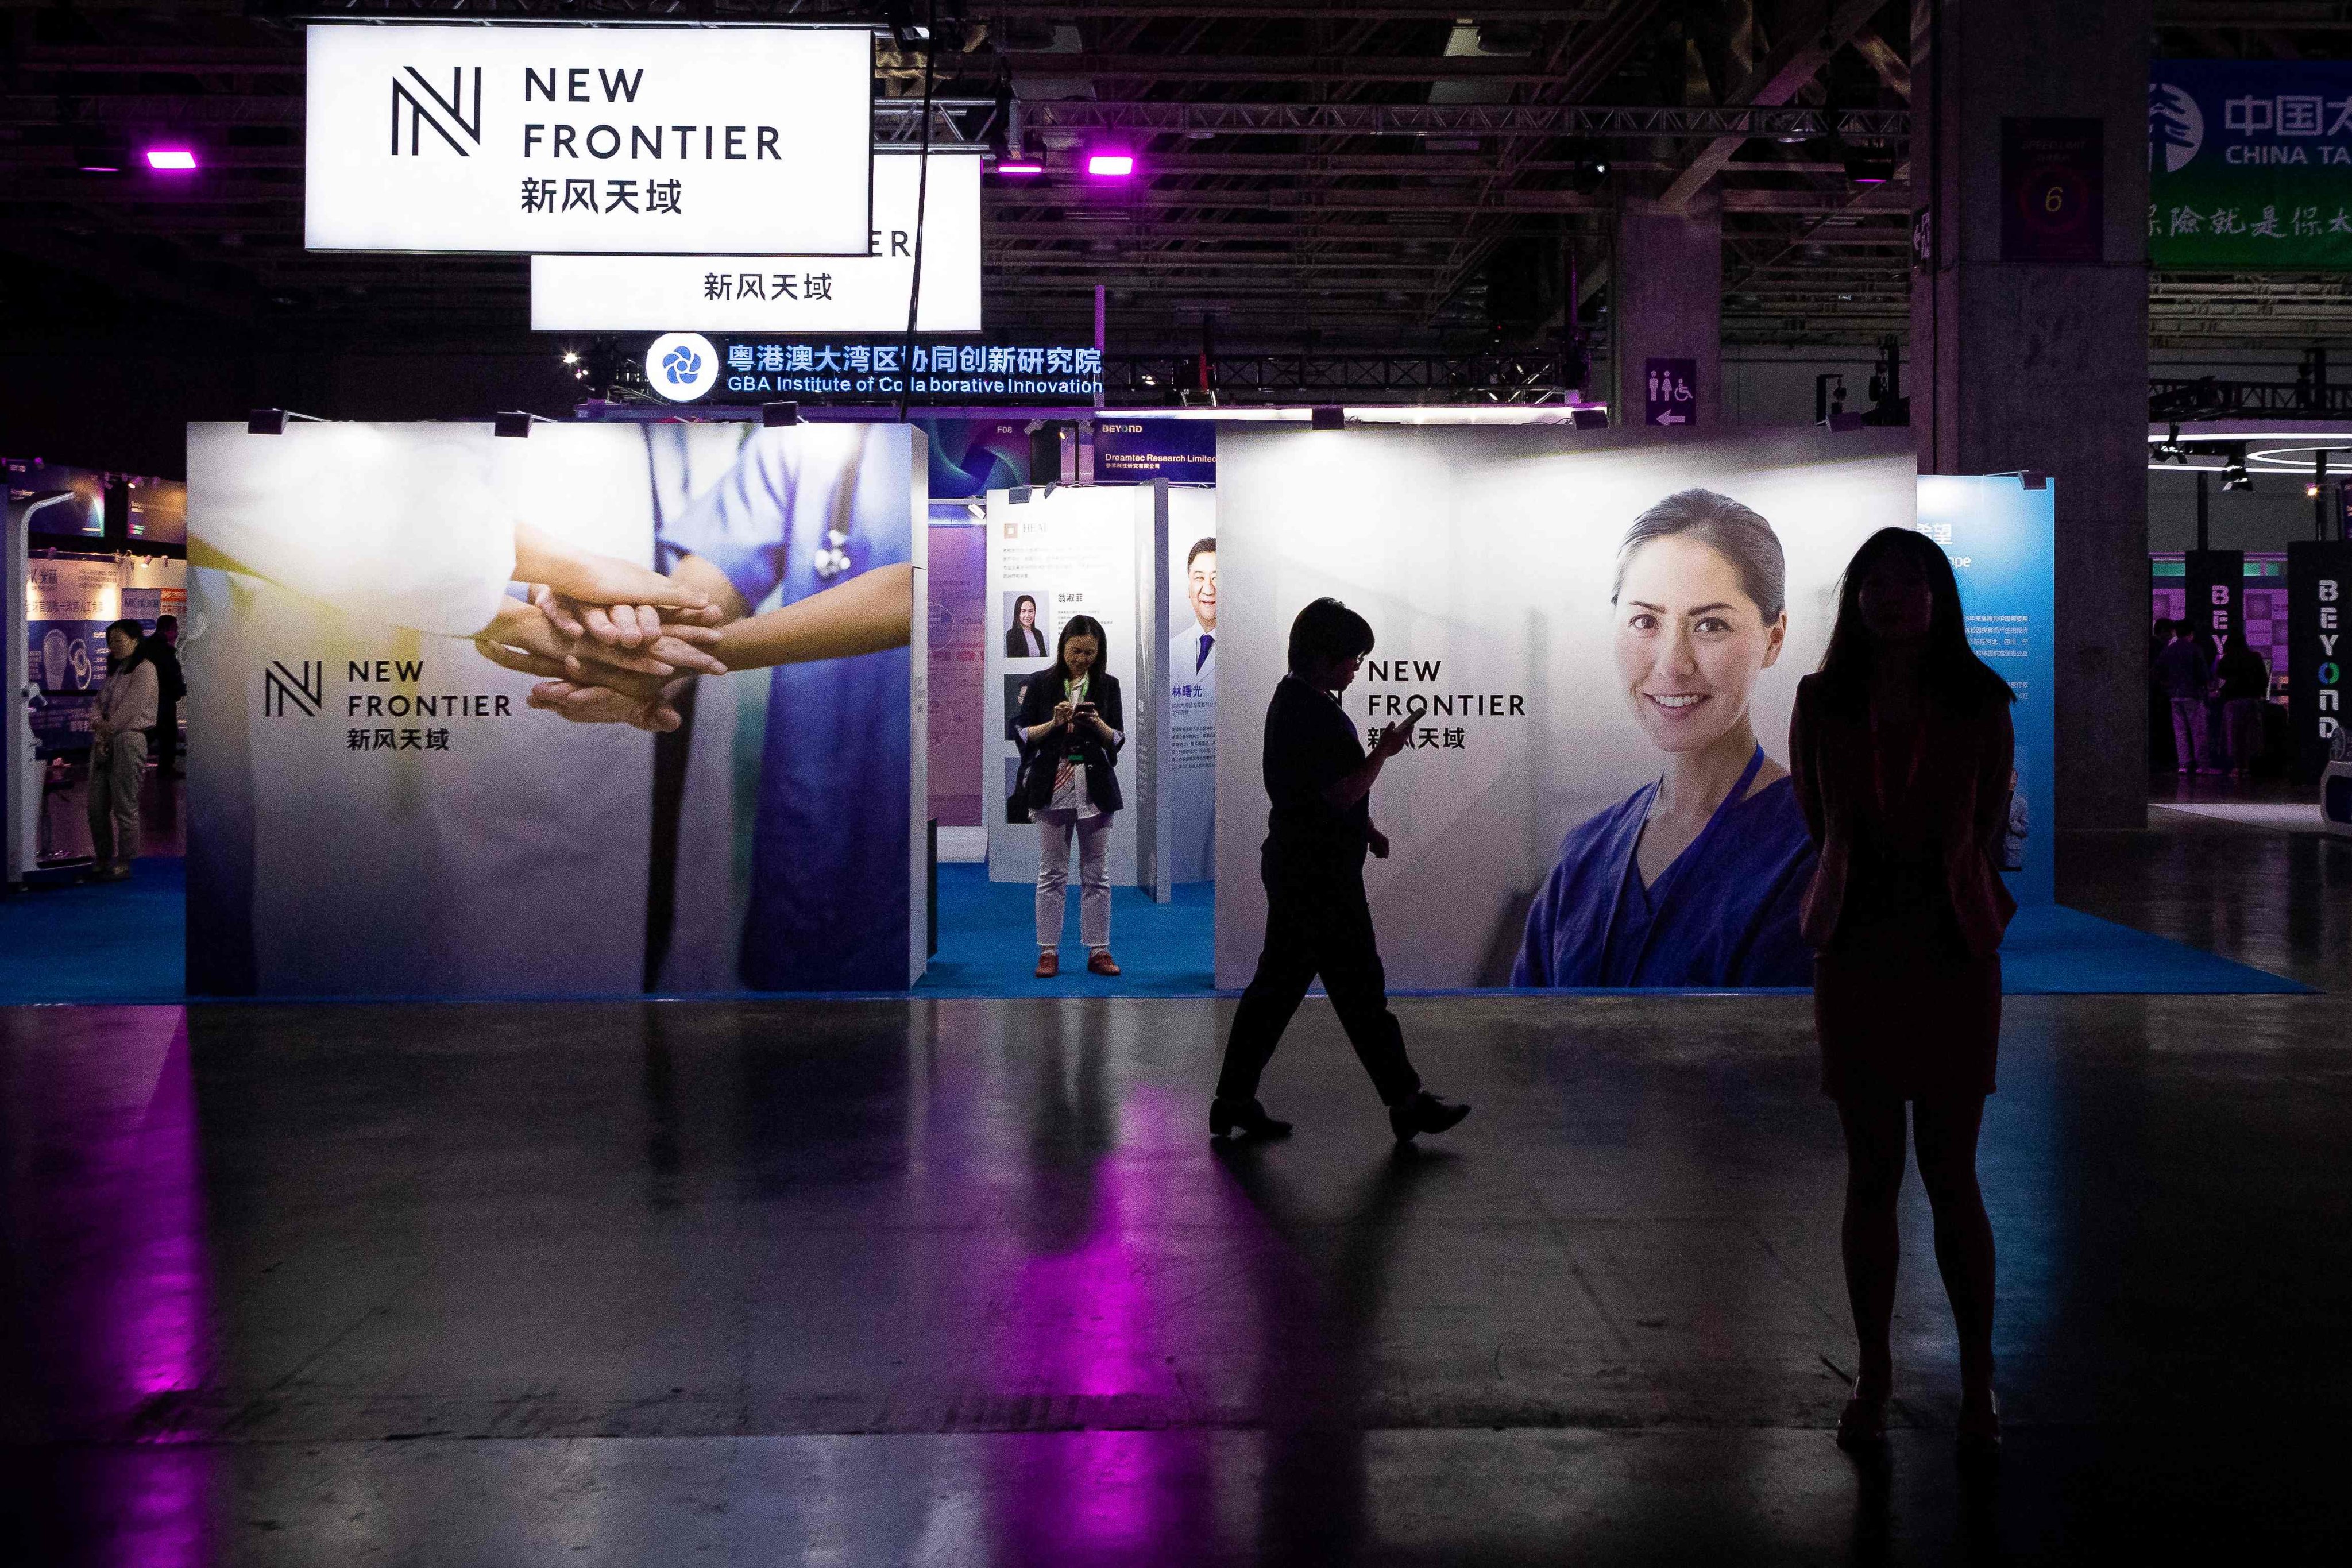 Visitors walk past a stand at the Beyond Expo tech conference in Macau on May 10. Photo: AFP